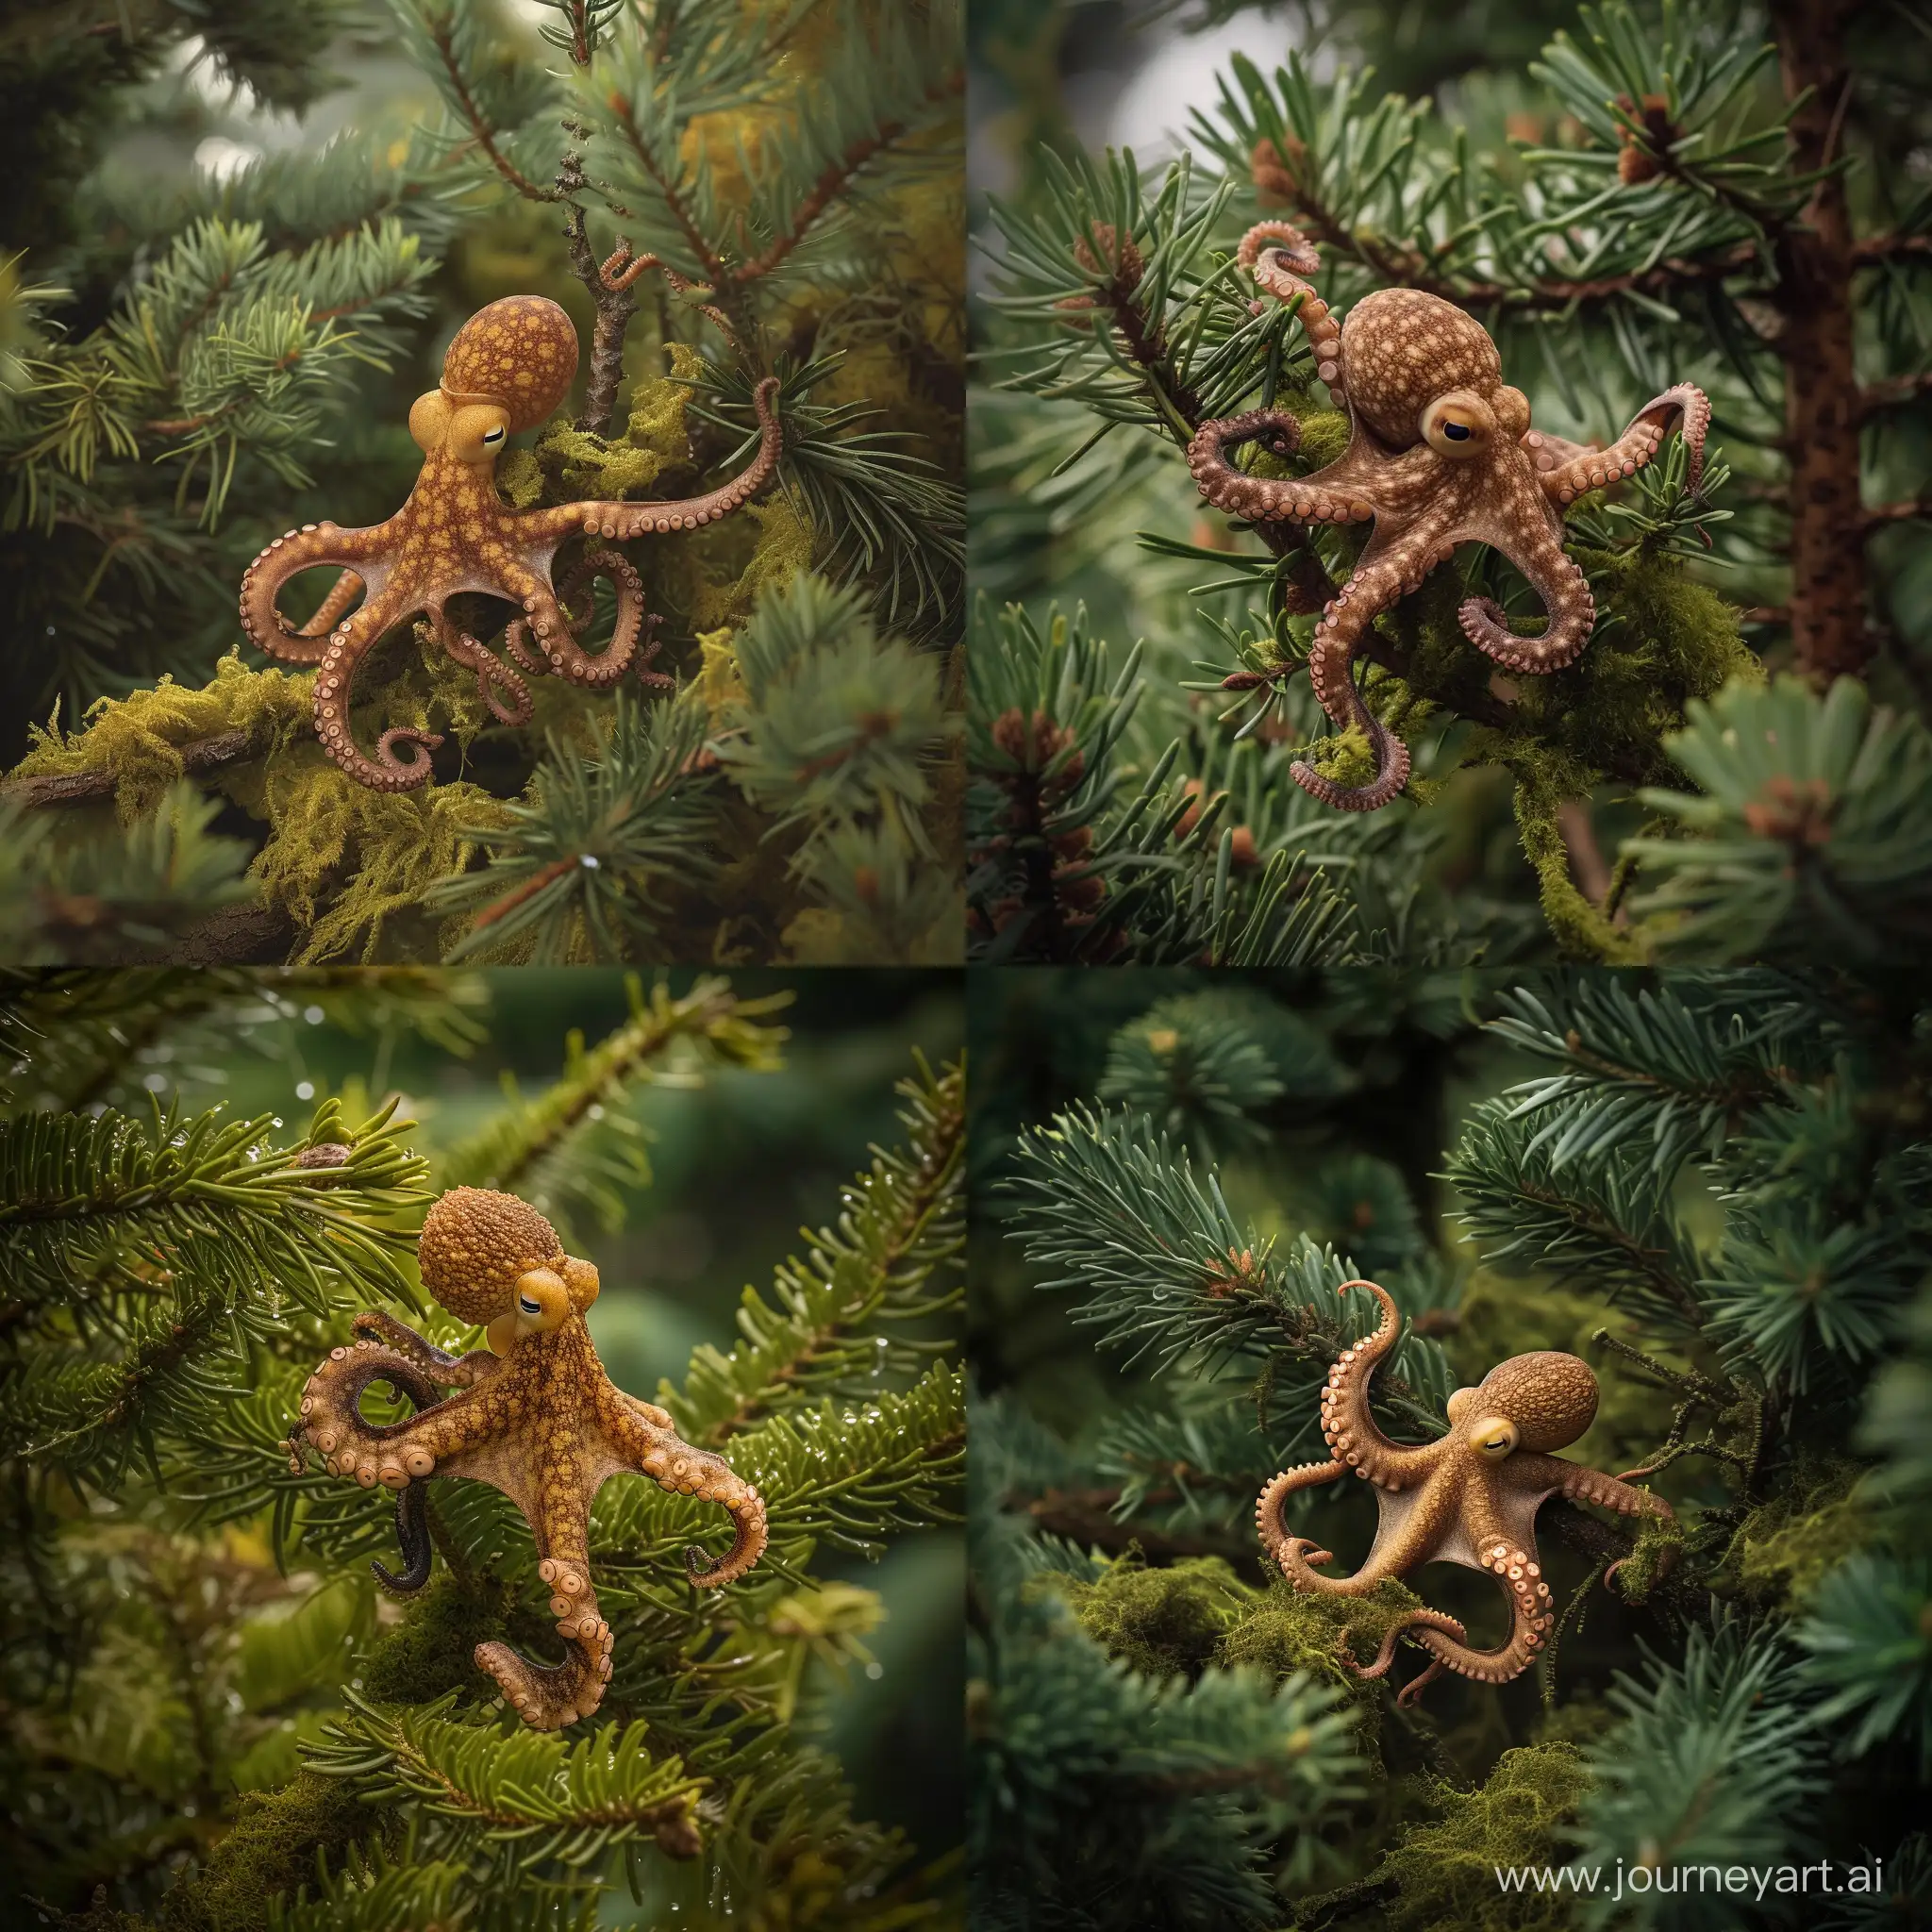 vibrant crisp wildlife photo of a baby mottled brown octopus grabbing onto the branches of a pine tree, mossy forest. thick dense foliage, canon camera, close up shot, award winning, nature photography